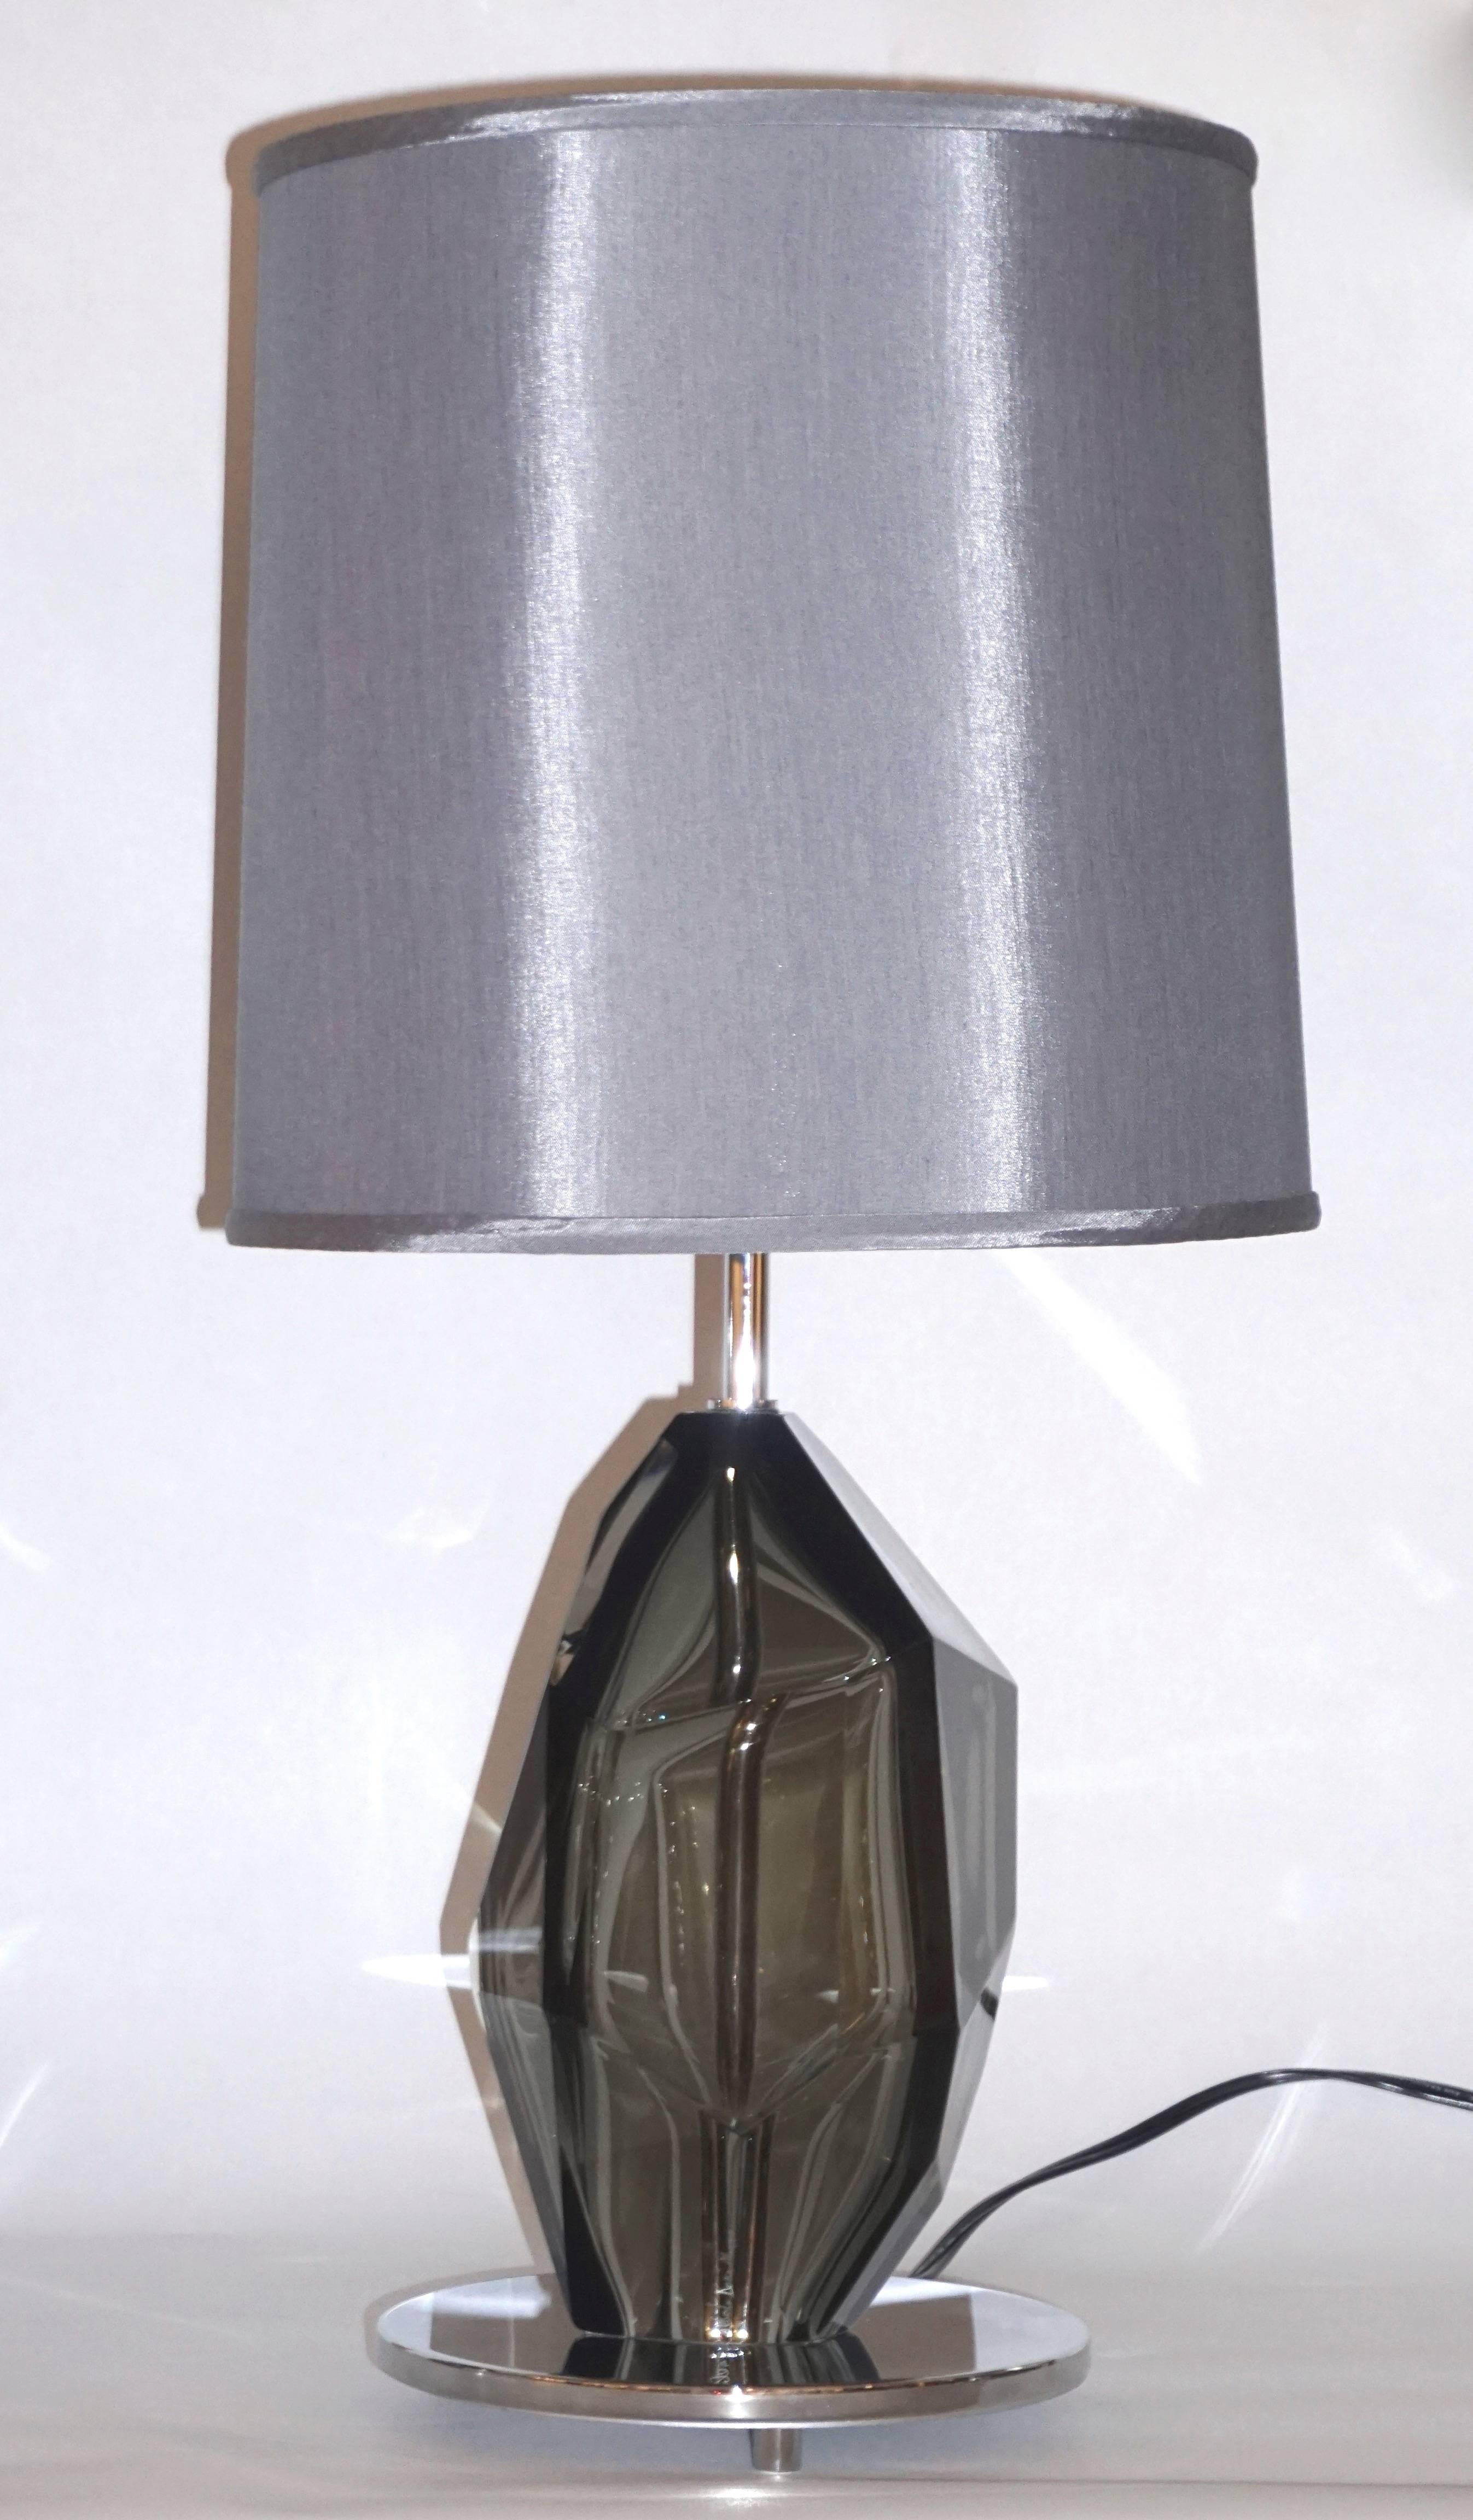 Blown Glass Donà Contemporary Italian Pair of Faceted Solid Rock Smoked Murano Glass Lamps